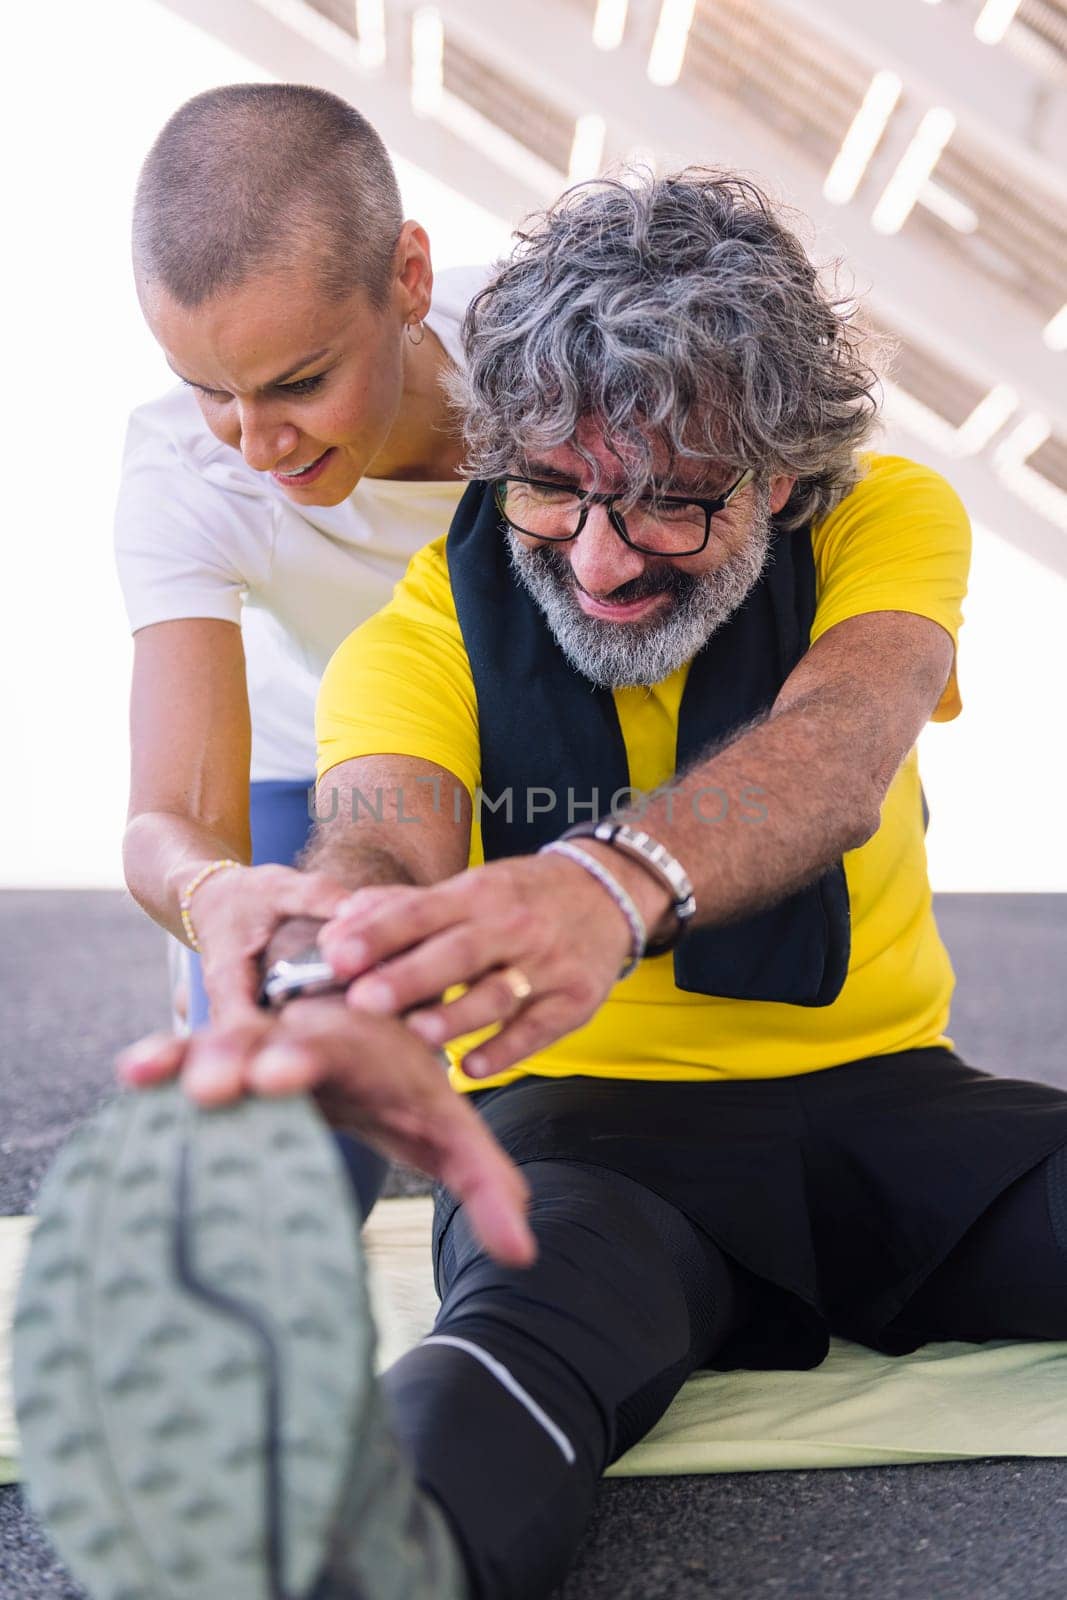 senior sports man stretching legs with his personal trainer, concept of active and healthy lifestyle in middle age